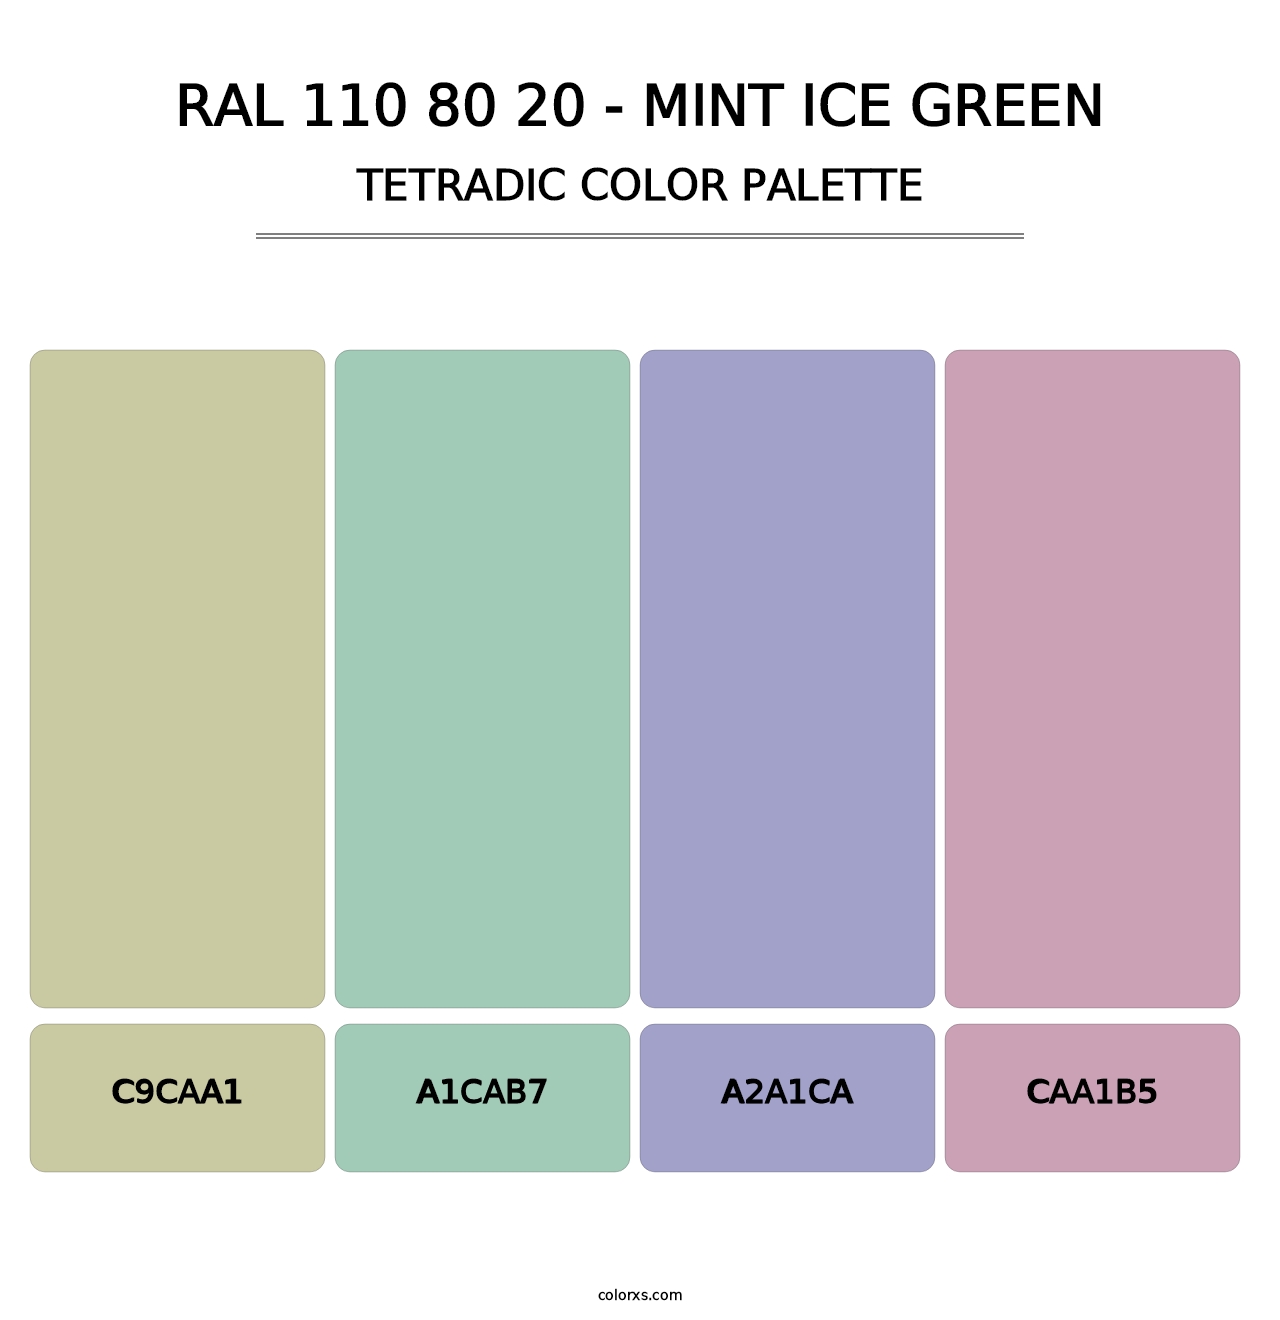 RAL 110 80 20 - Mint Ice Green - Tetradic Color Palette